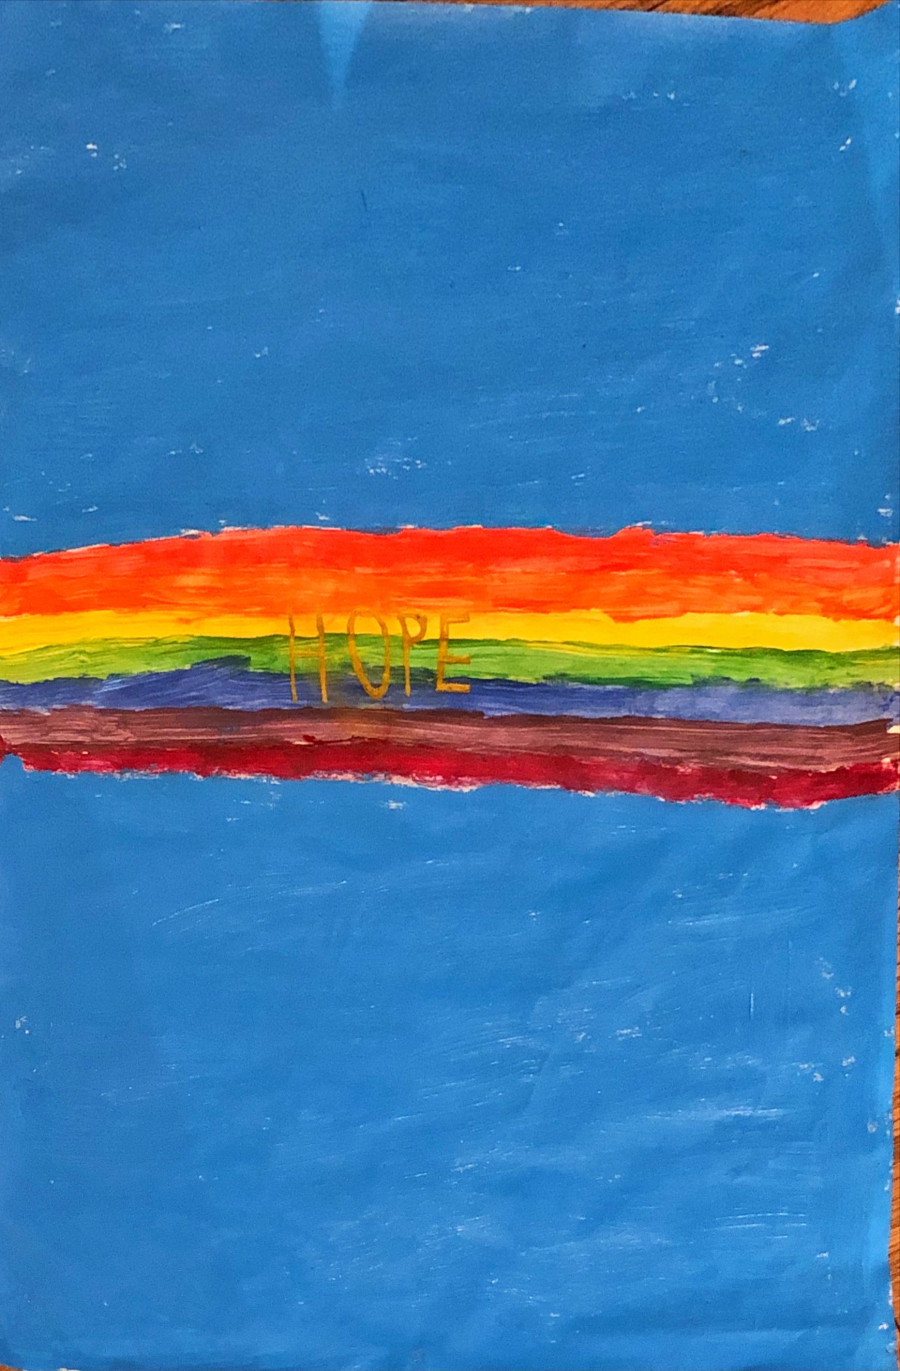 'Rainbow' by Kate (9) from Cork